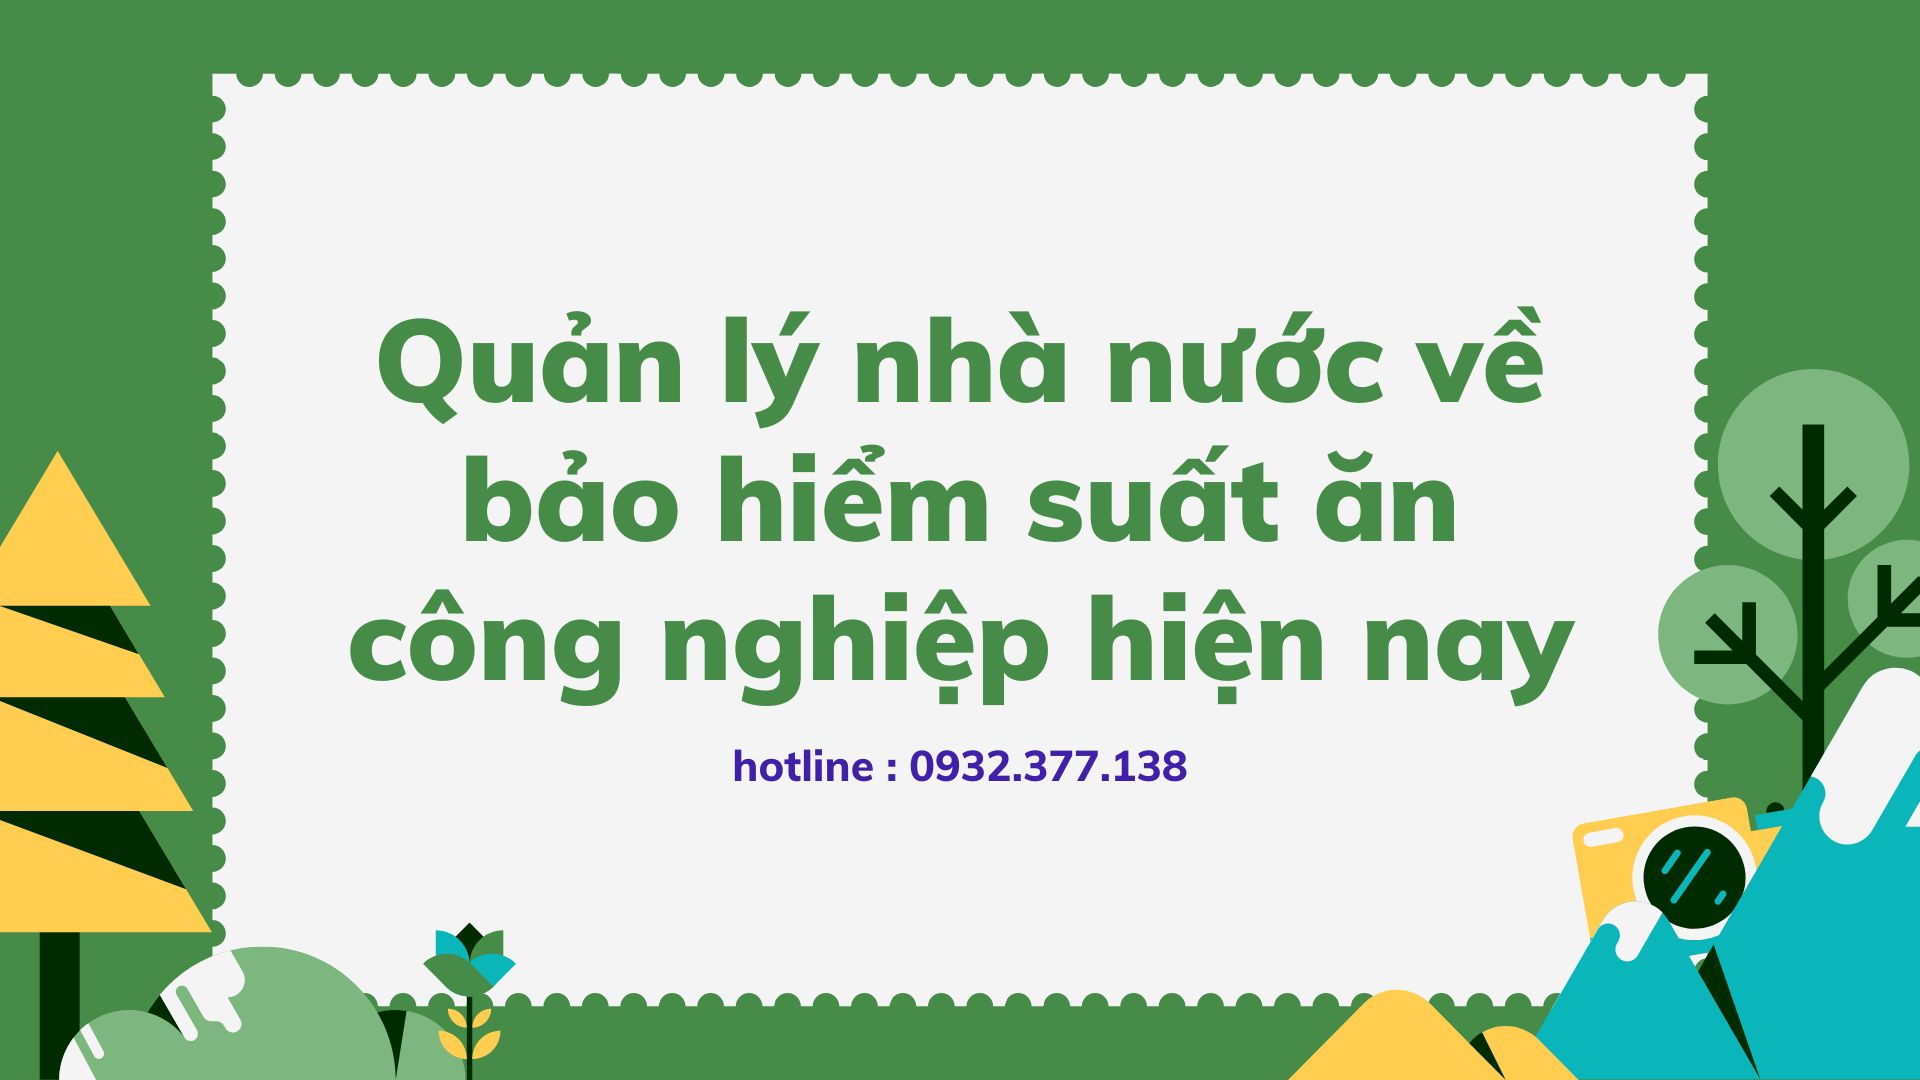 quan-ly-nha-nuoc-ve-suat-an-cong-nghiep